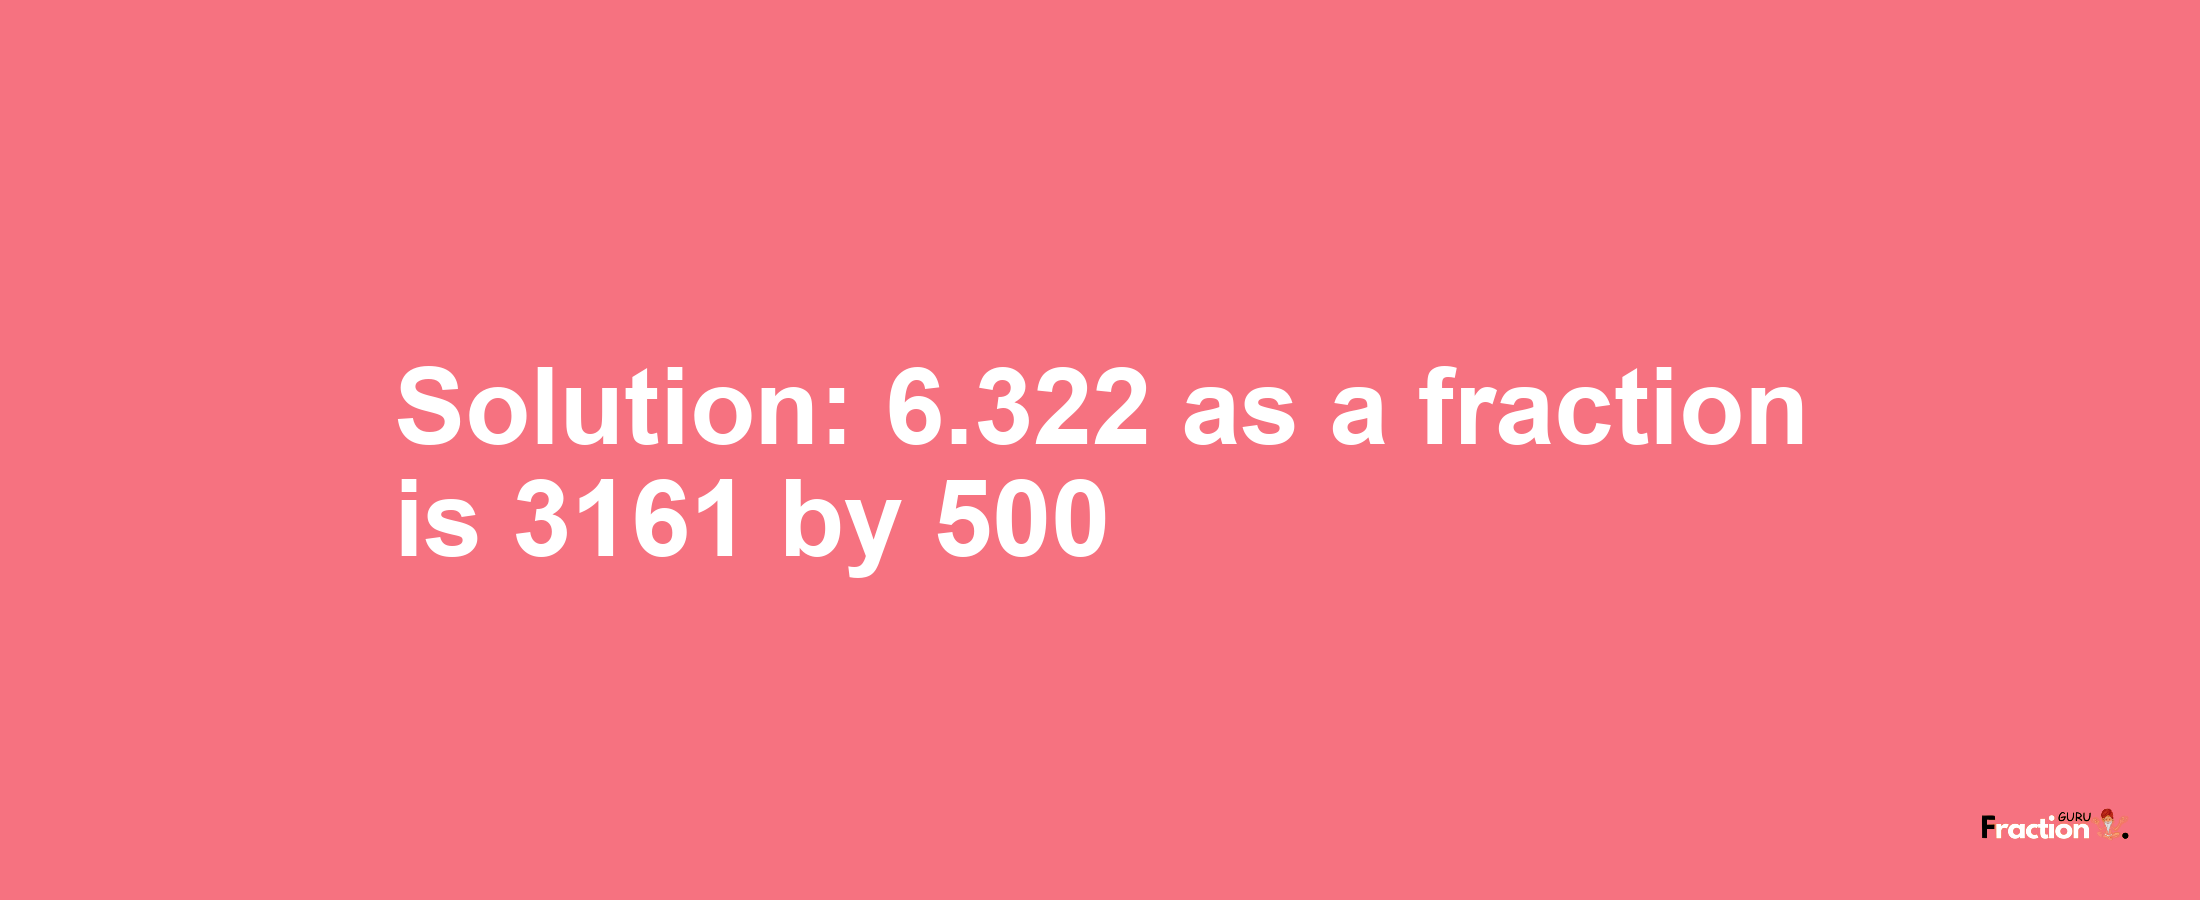 Solution:6.322 as a fraction is 3161/500